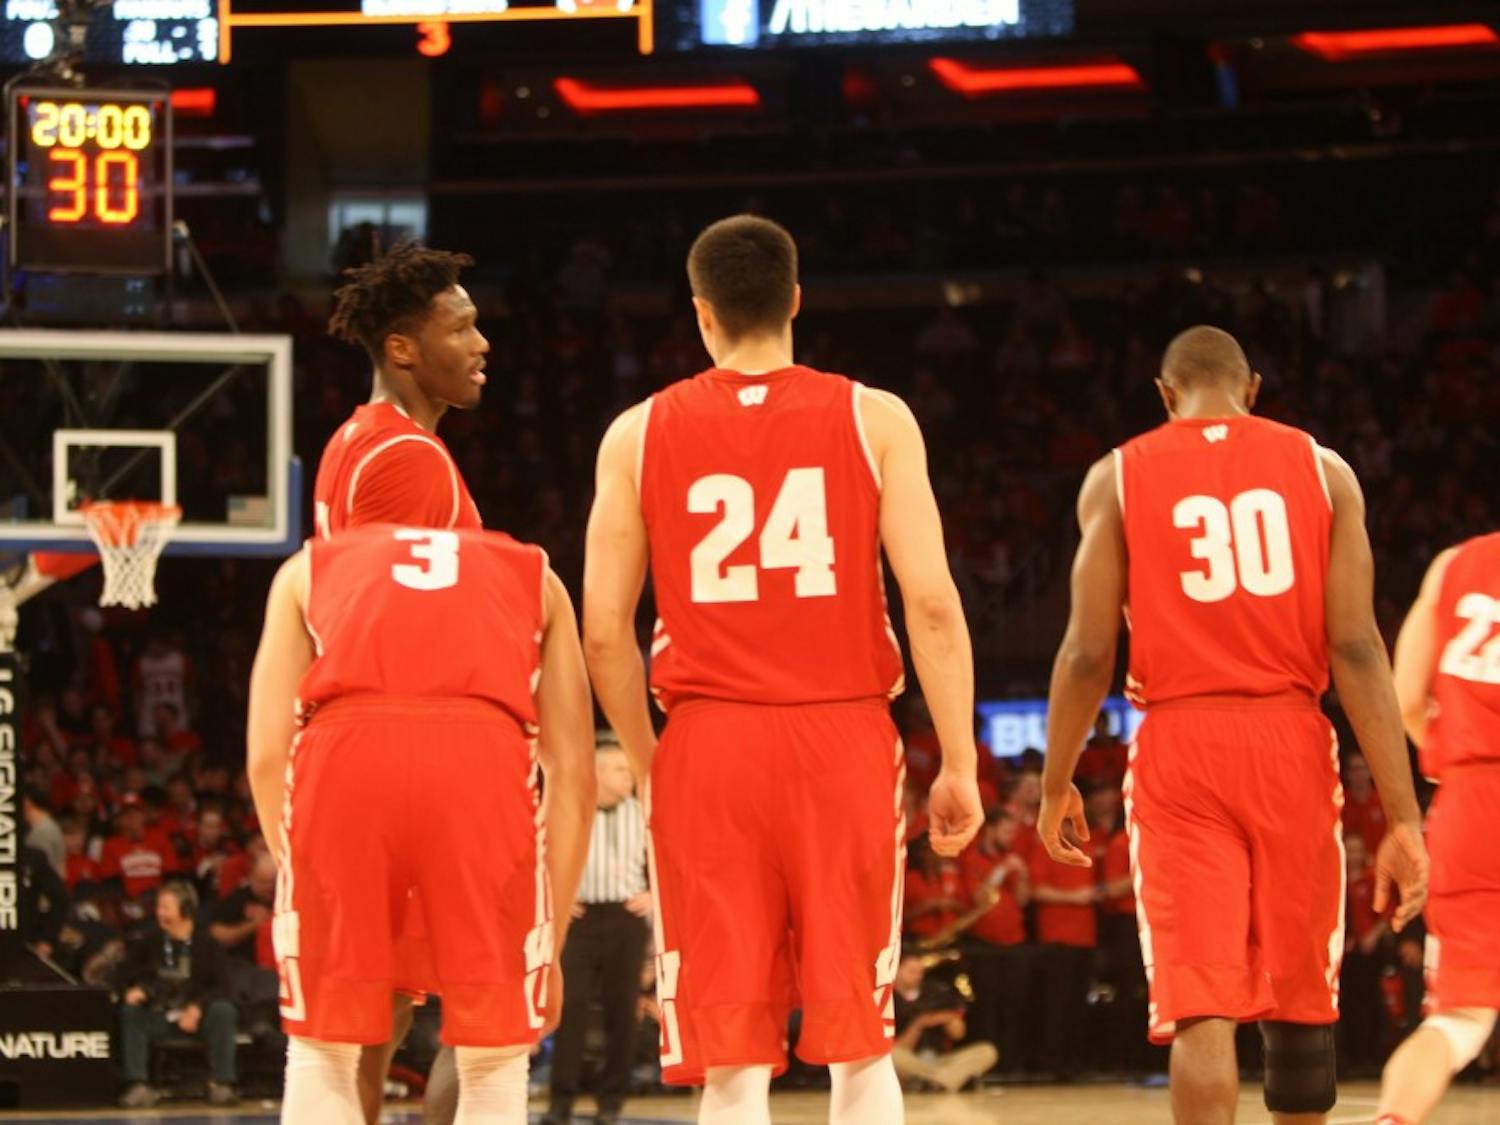 The Badgers prevailed in overtime despite a dismal shooting performance most of the game.&nbsp;